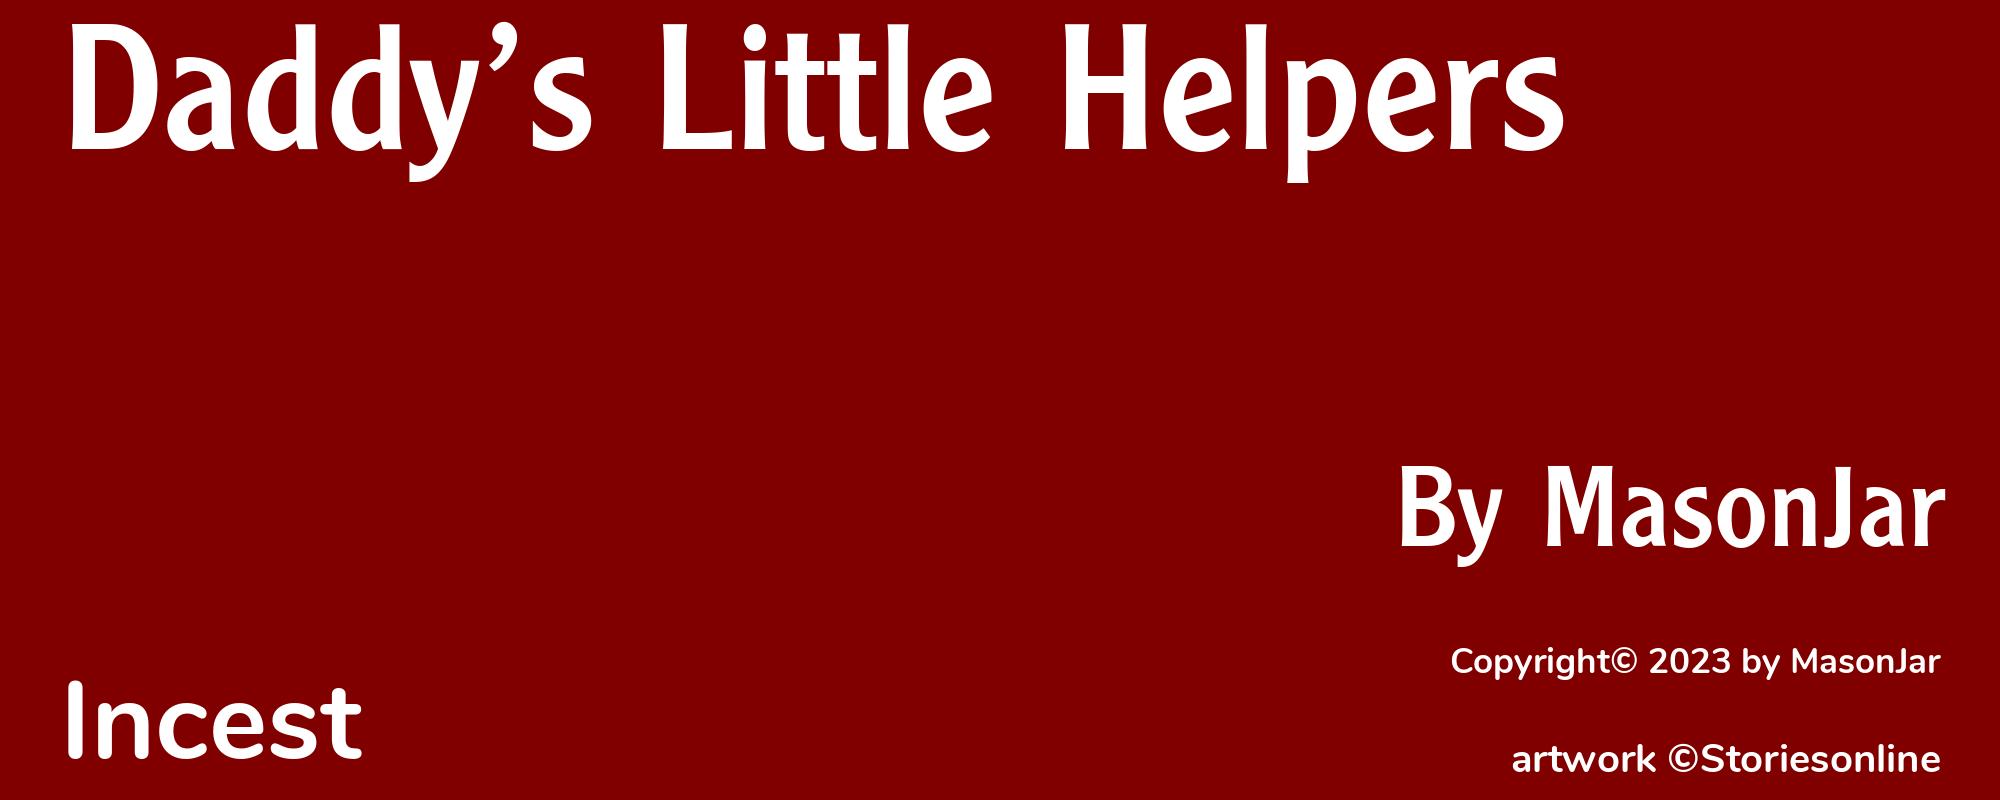 Daddy’s Little Helpers - Cover